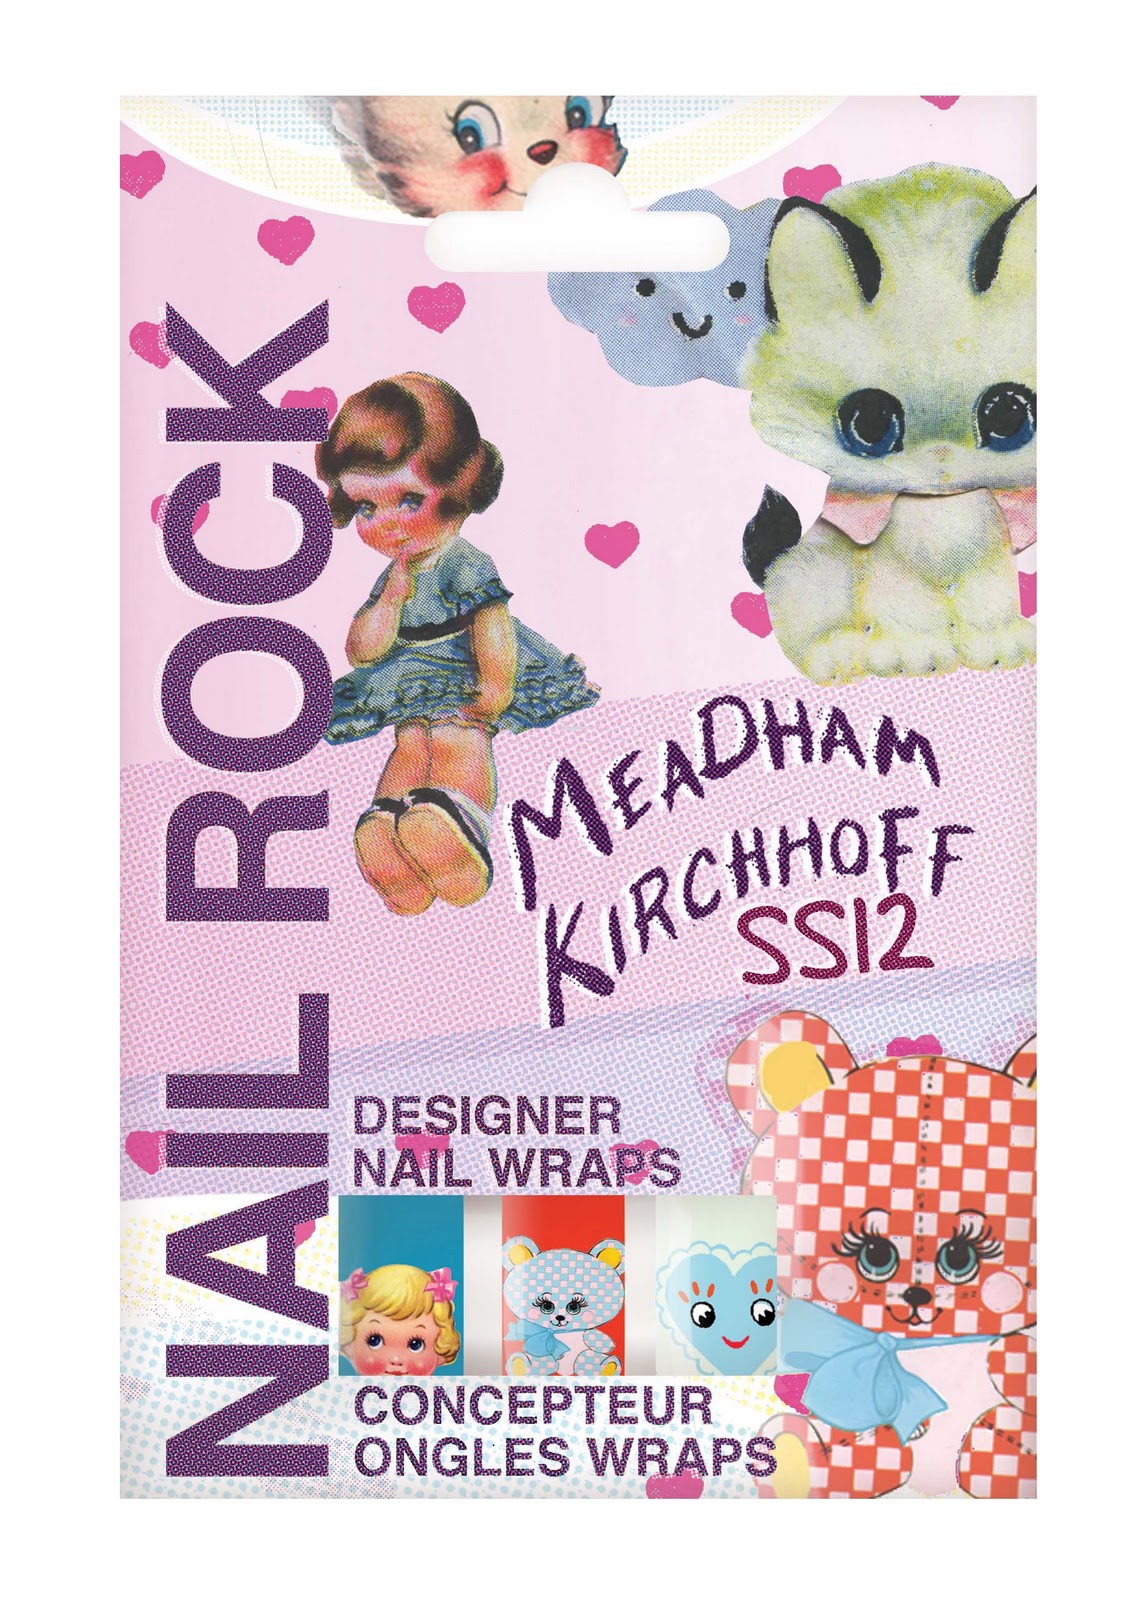 Nail Rock will soon be launching these very same nail wraps!